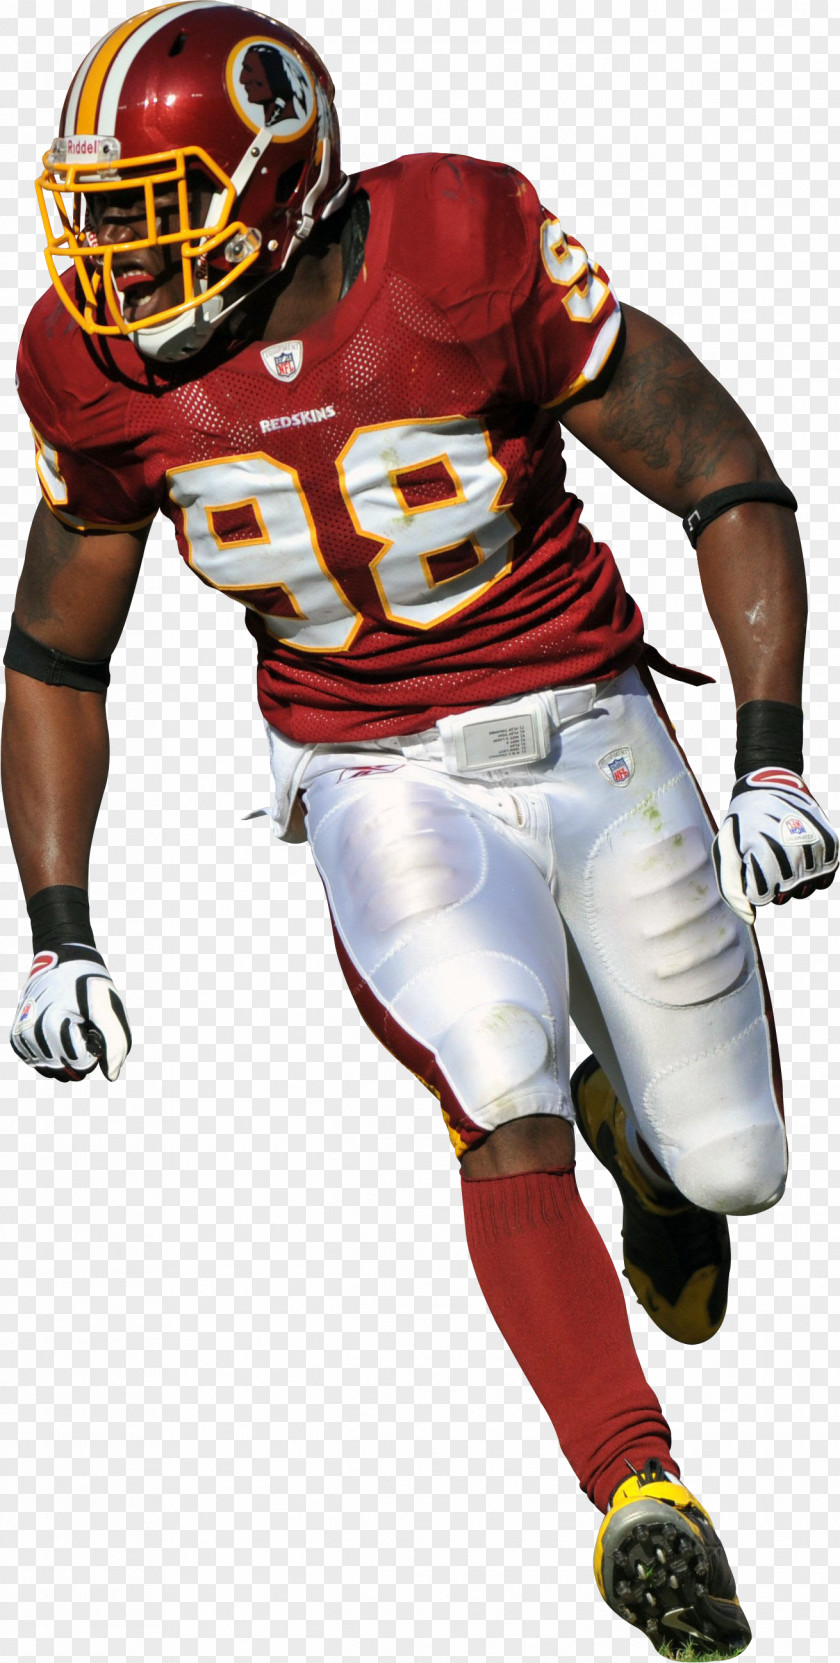 Washington Redskins Protective Gear In Sports American Football PNG